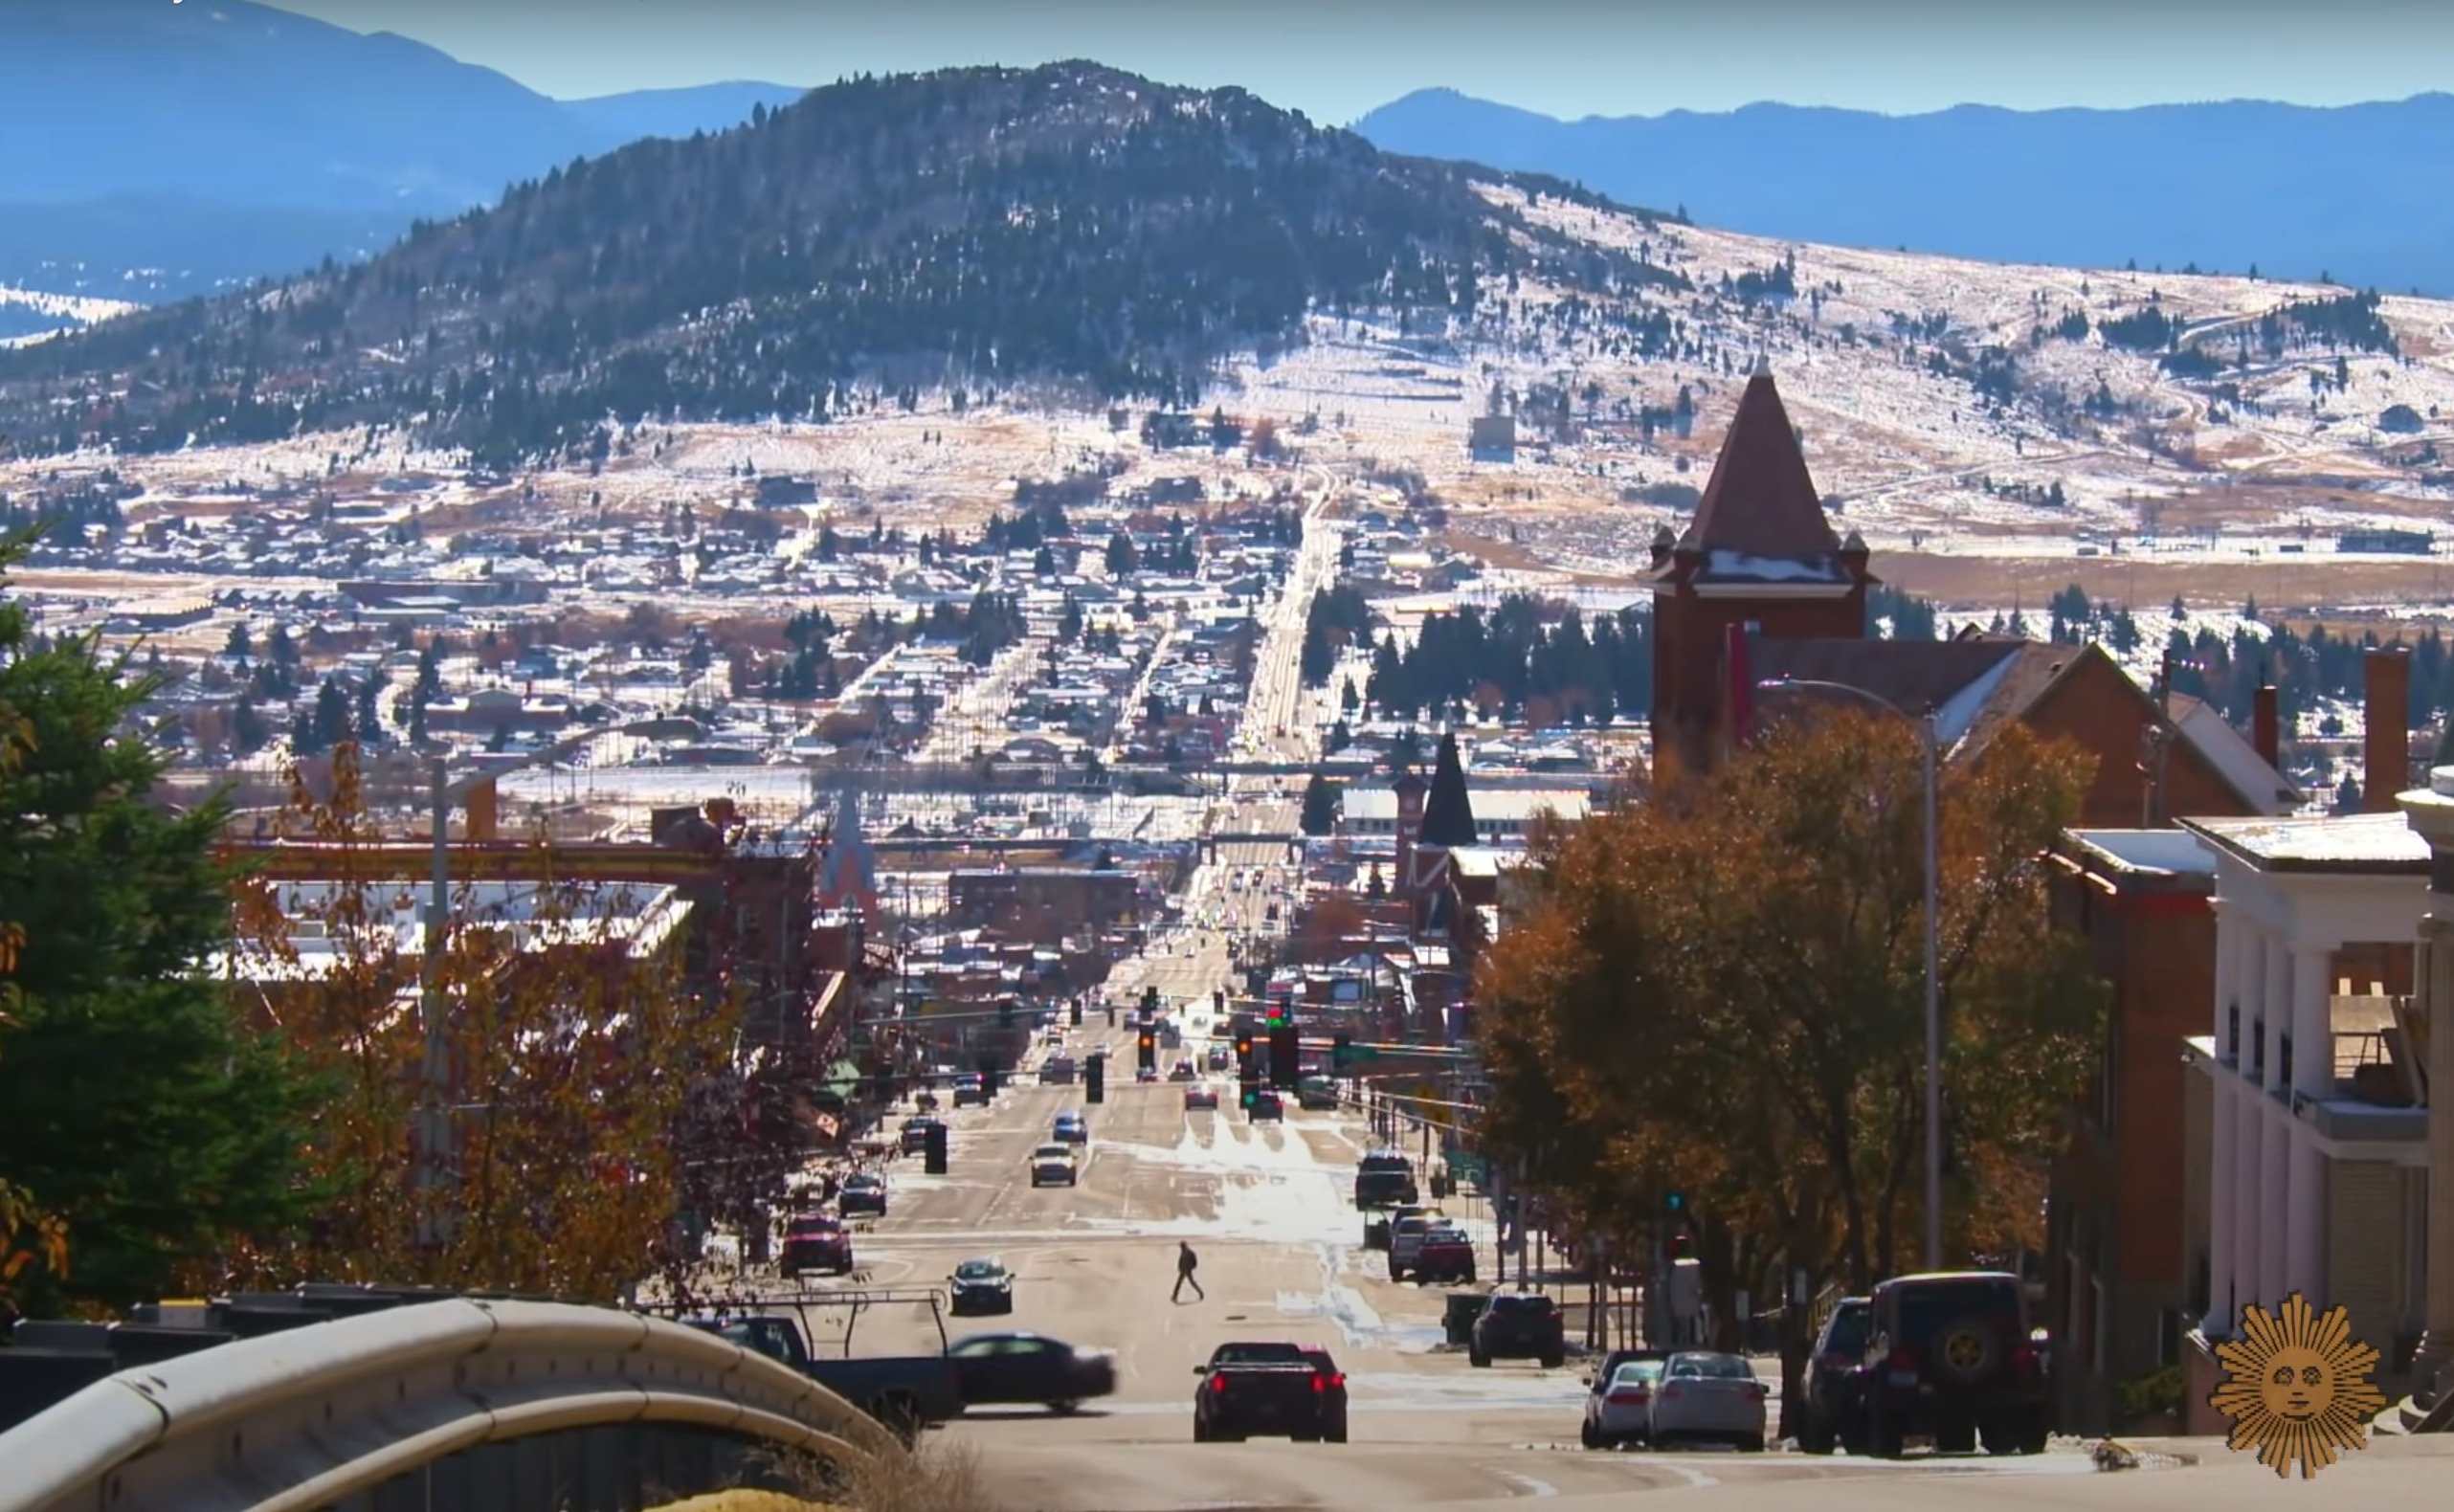 sketchy American cities  - Butte, Montana